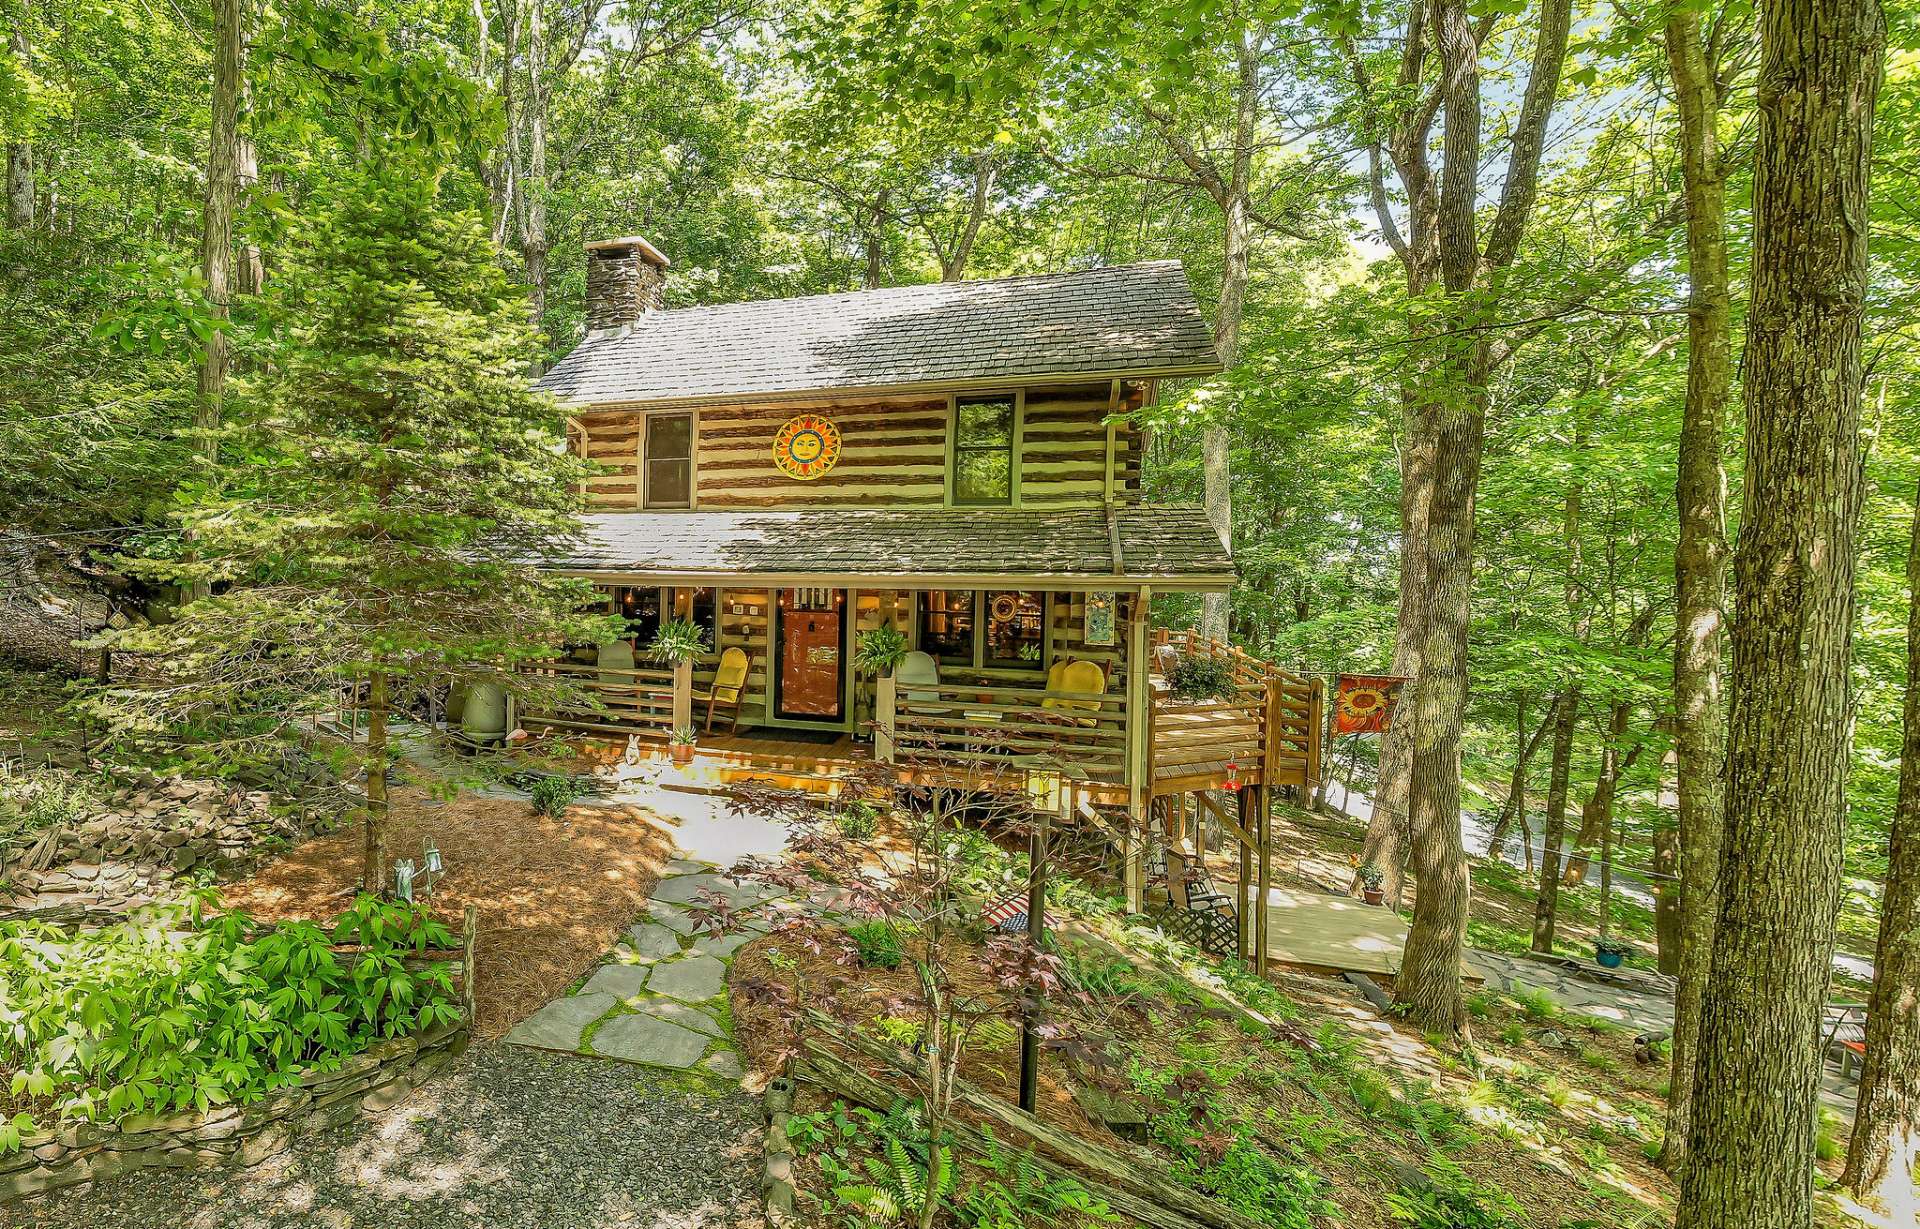 This charming getaway is embraced by the native mountain foliage and hardwoods.